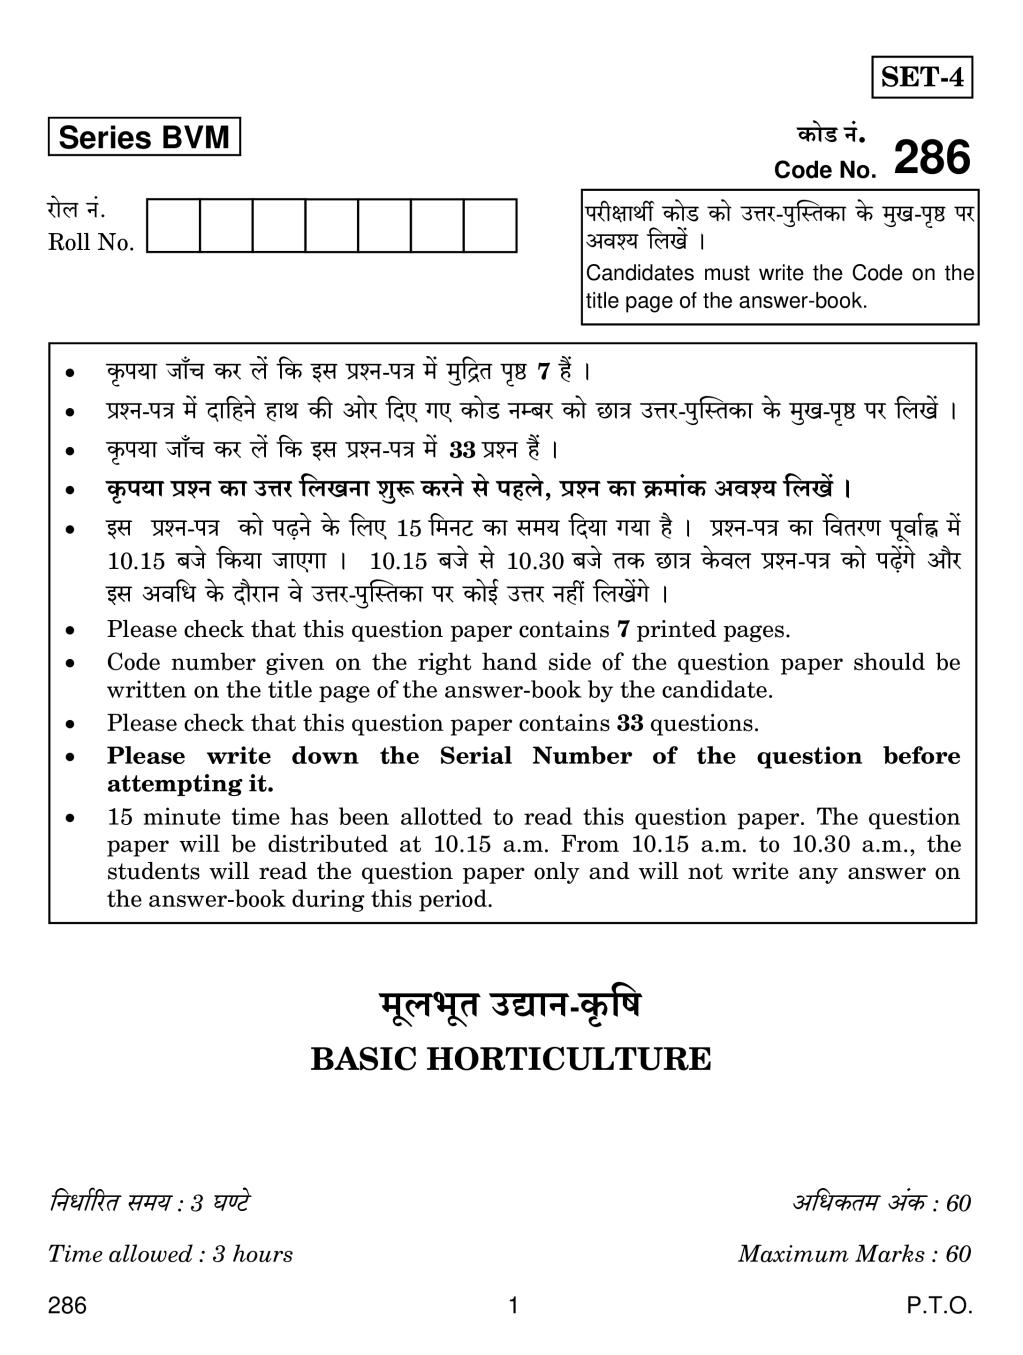 CBSE Class 12 Basic Horticulture Question Paper 2019 - Page 1